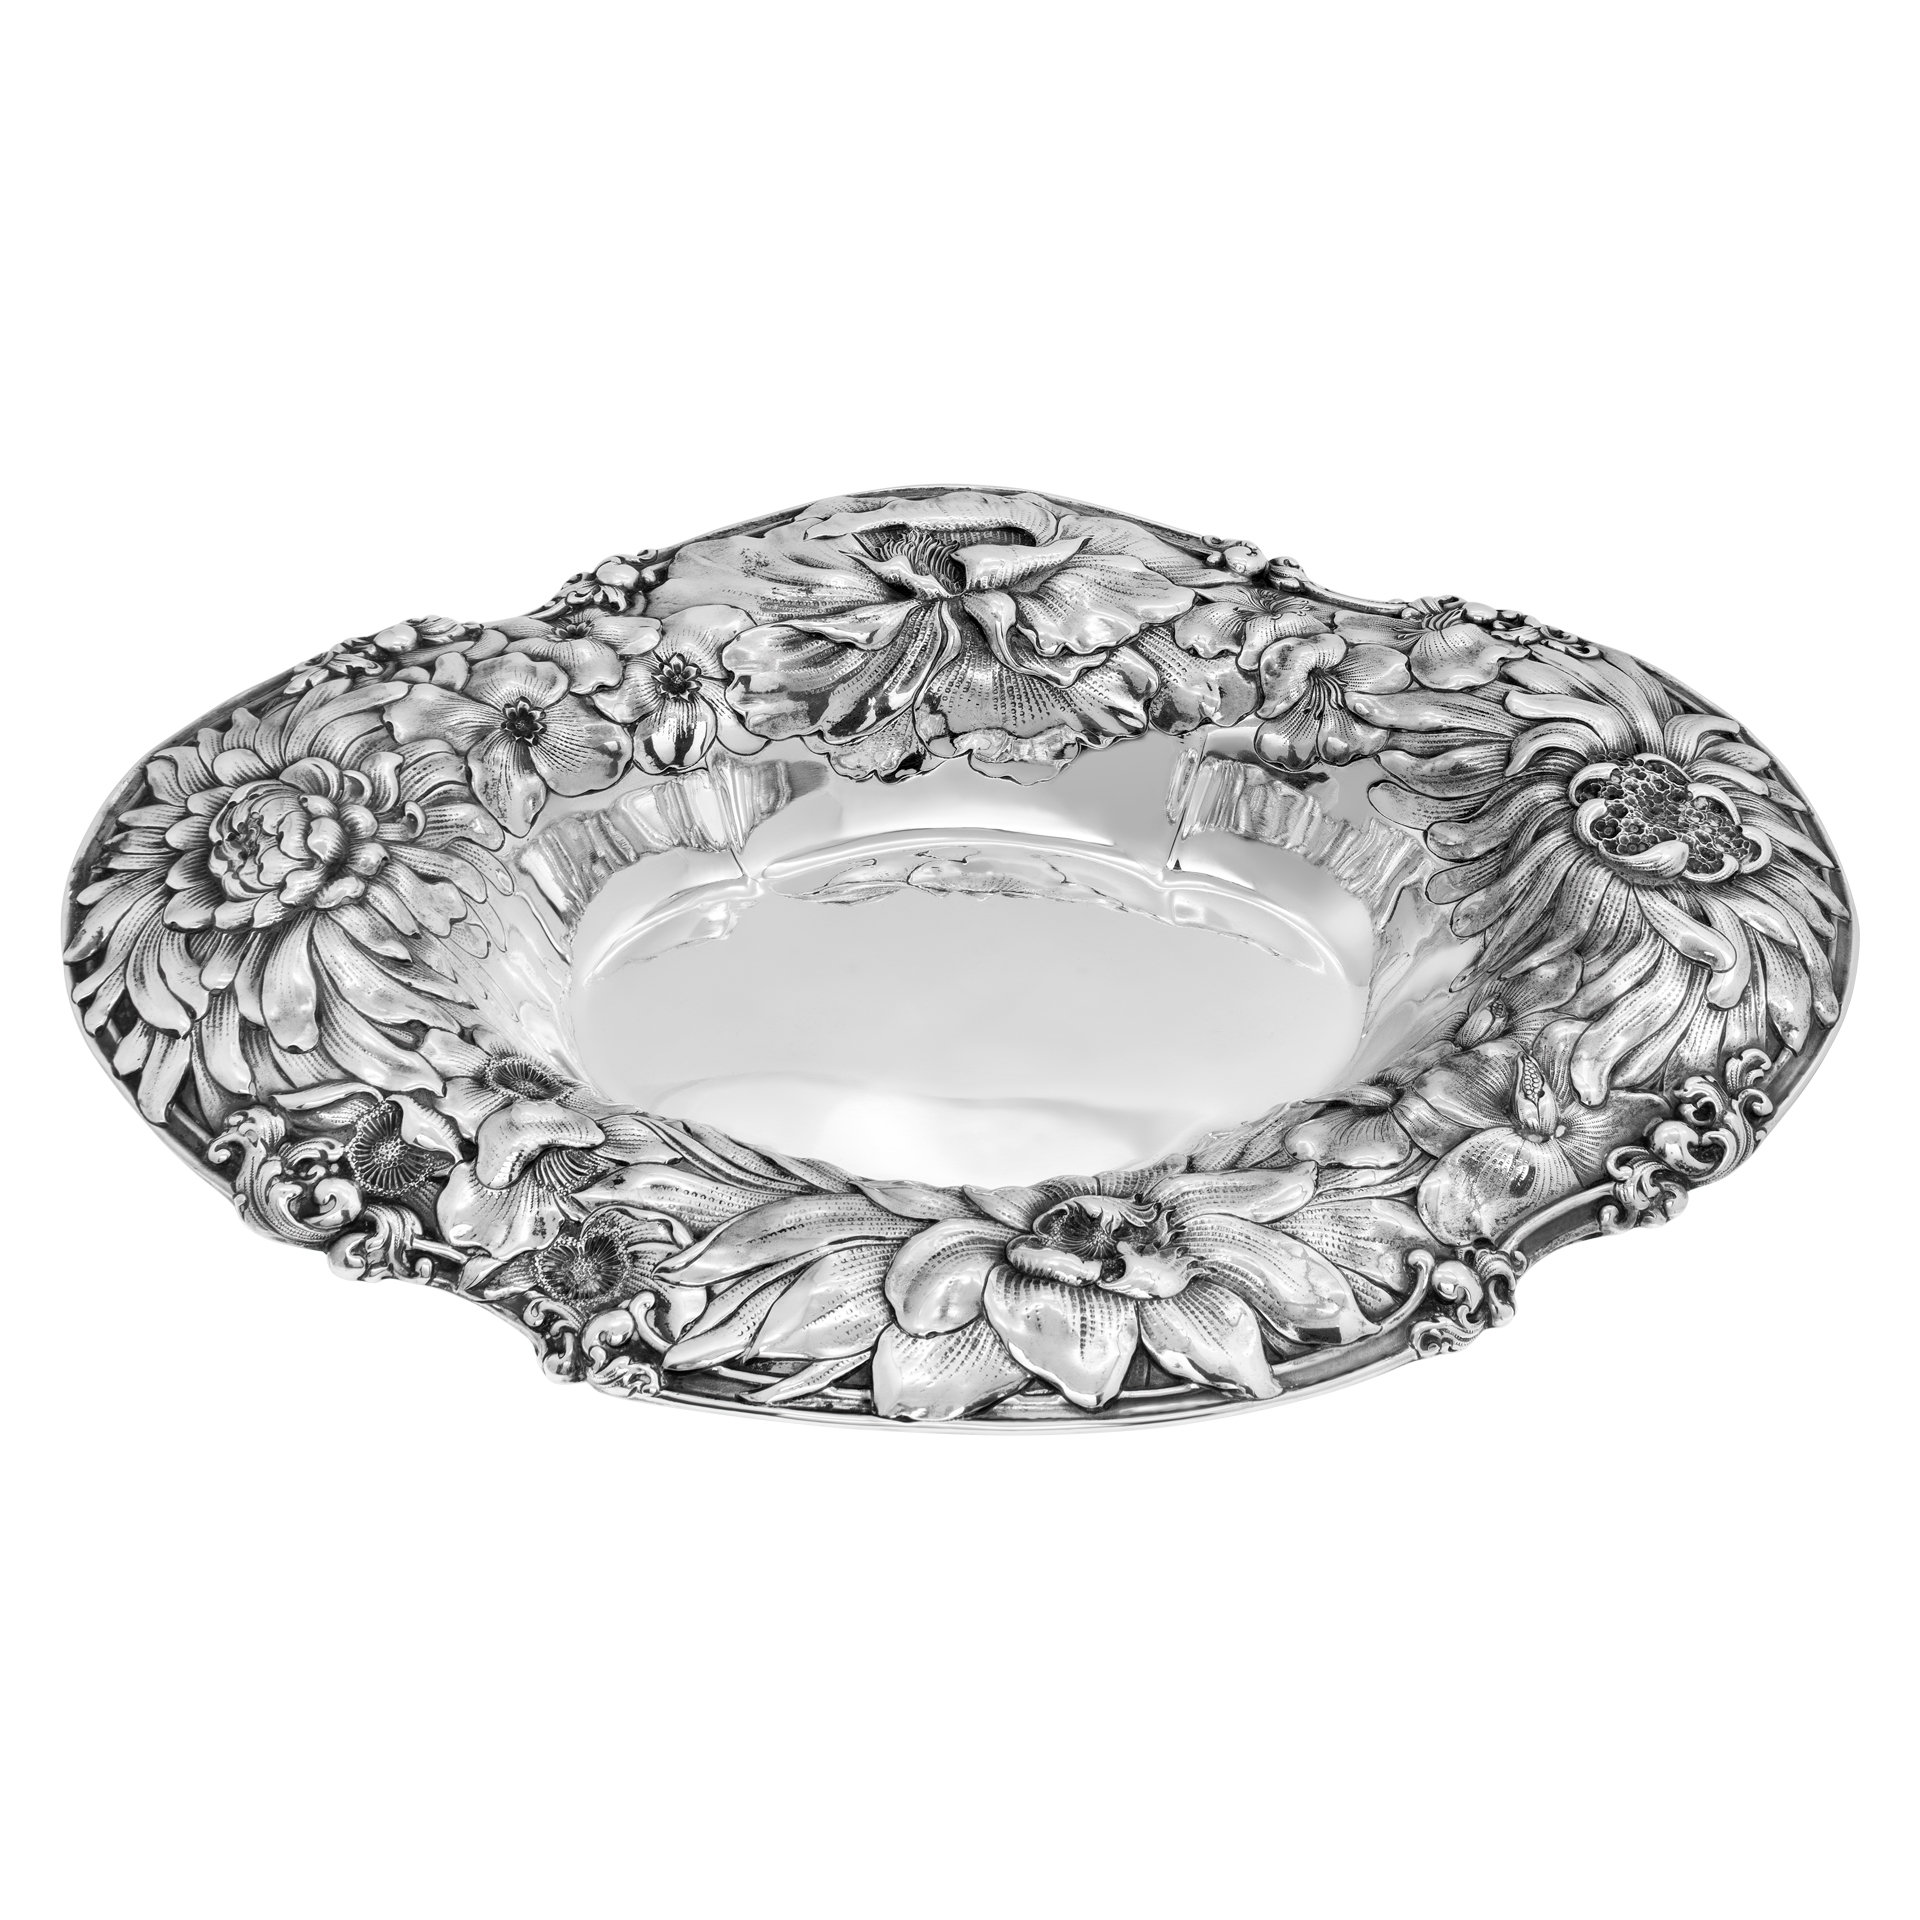 Antique IMPERIAL CHRYSANTHEMUM sterling silver oval bowl centerpiece, patented in 1894 by Gorham.